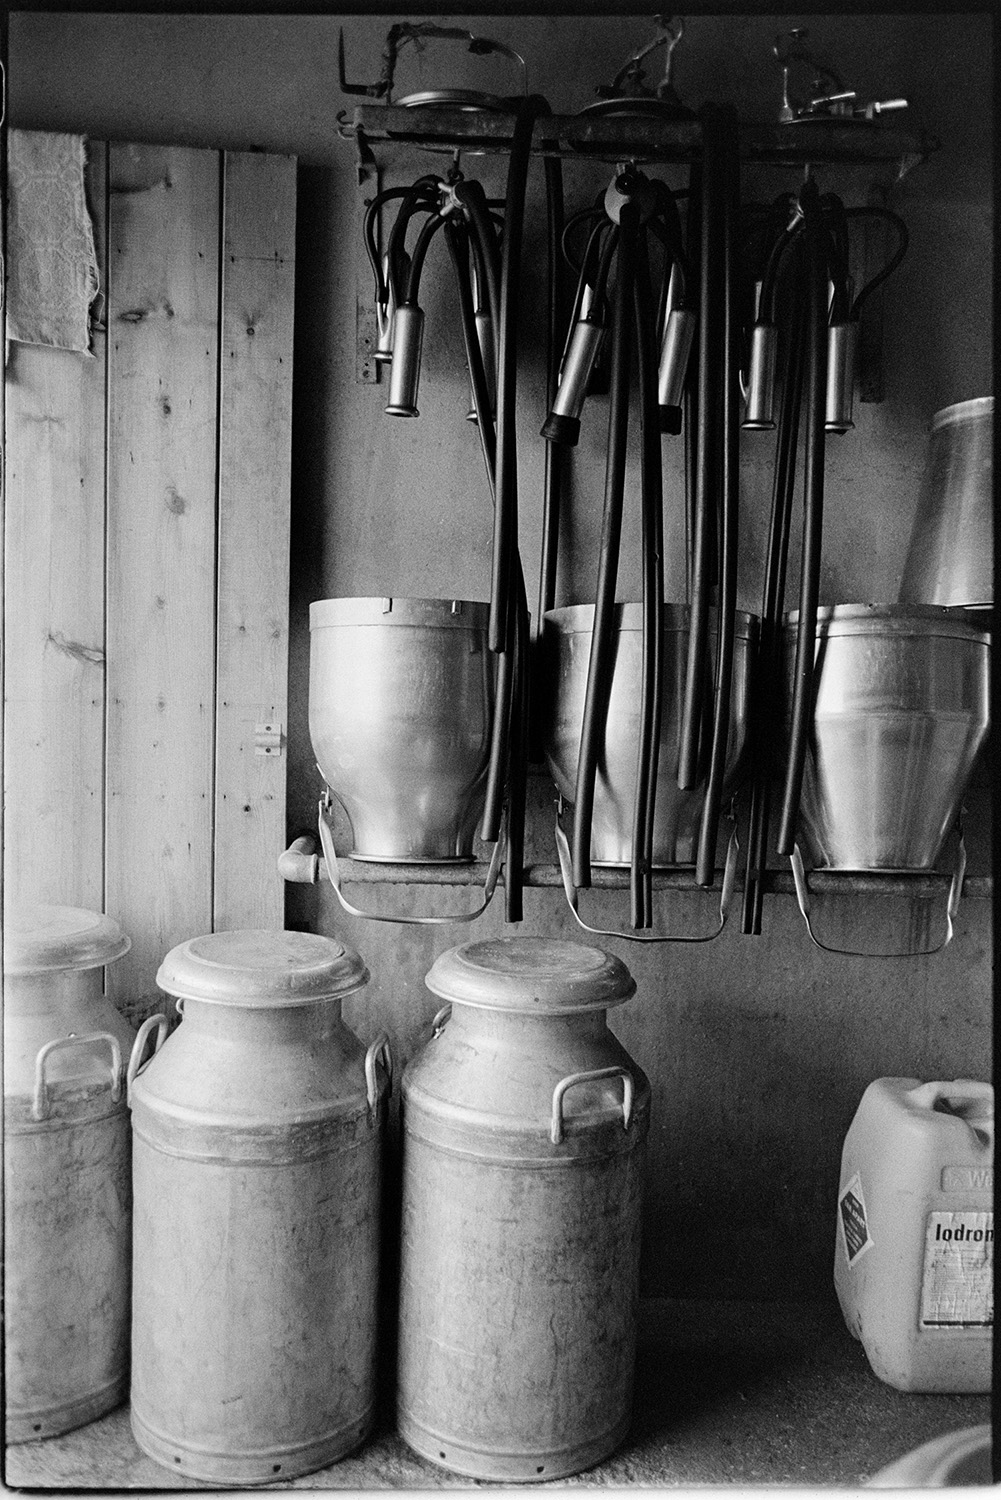 Dairy equipment, milk churns hoses etc hanging on wall. 
[Milk churns and hoses for milking machines stacked and hung on the wall in the milking parlour at Hallcourt, Petrockstowe.]